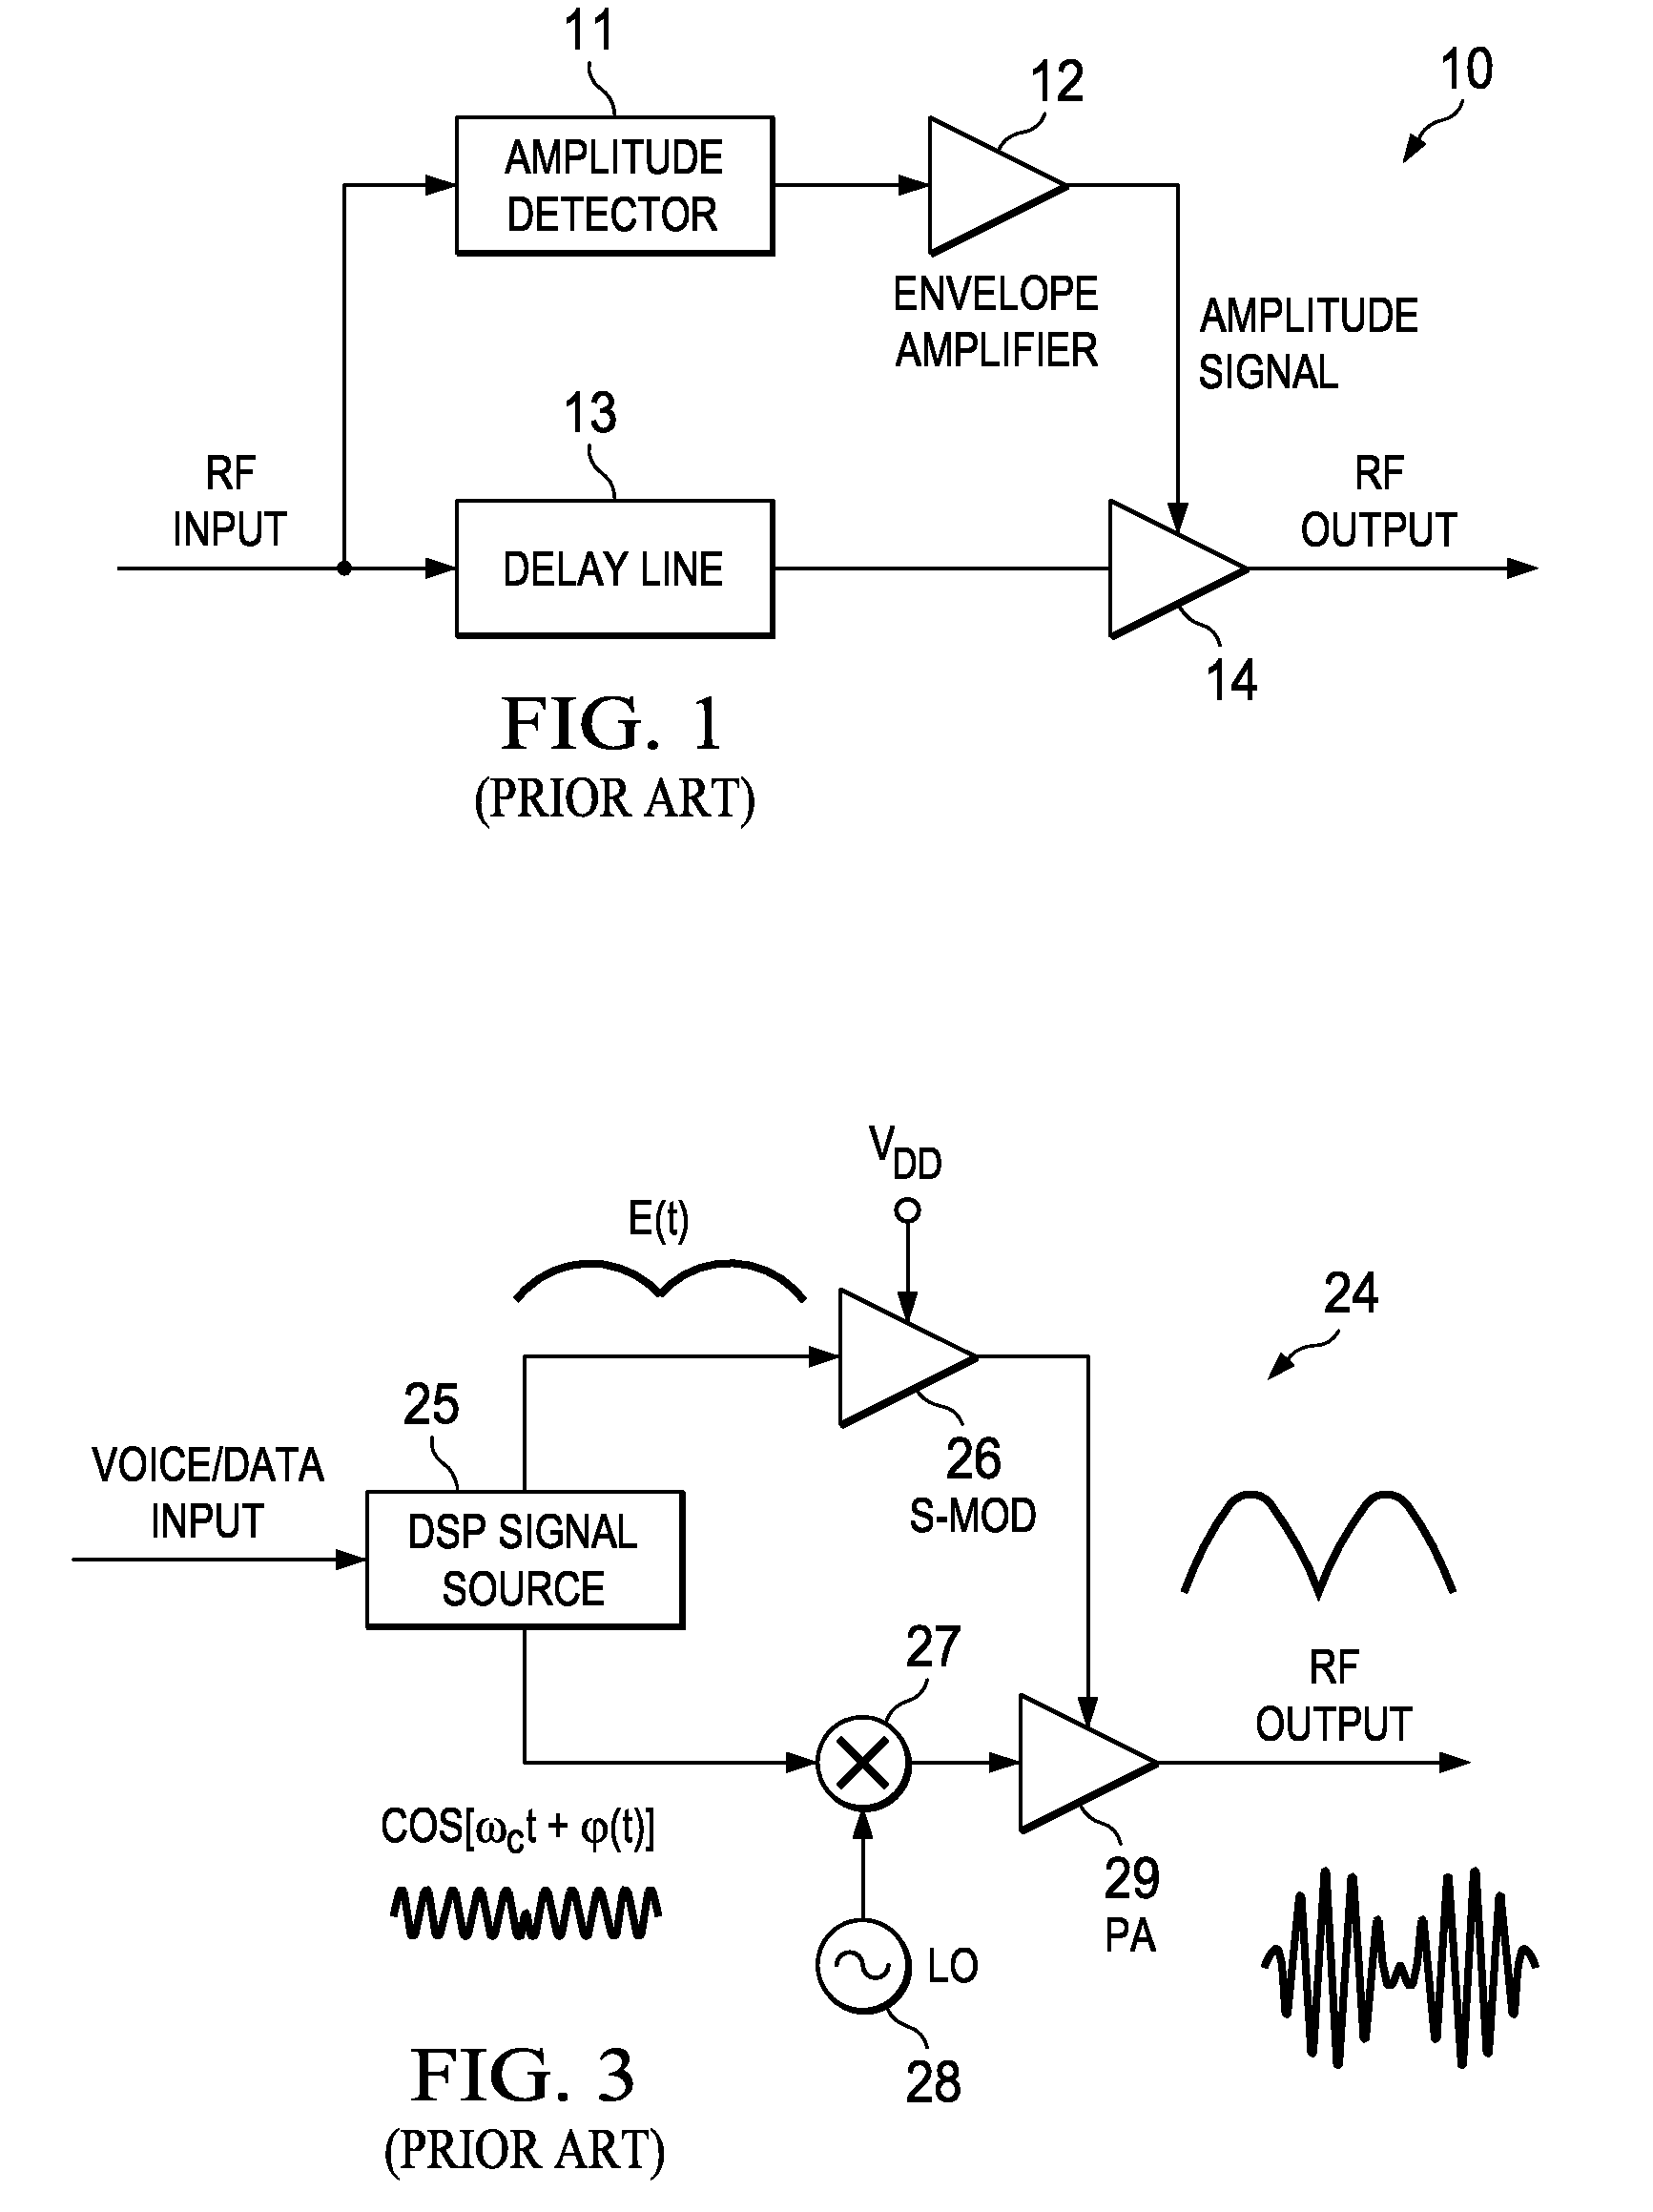 High efficiency digital transmitter incorporating switching power supply and linear power amplifier